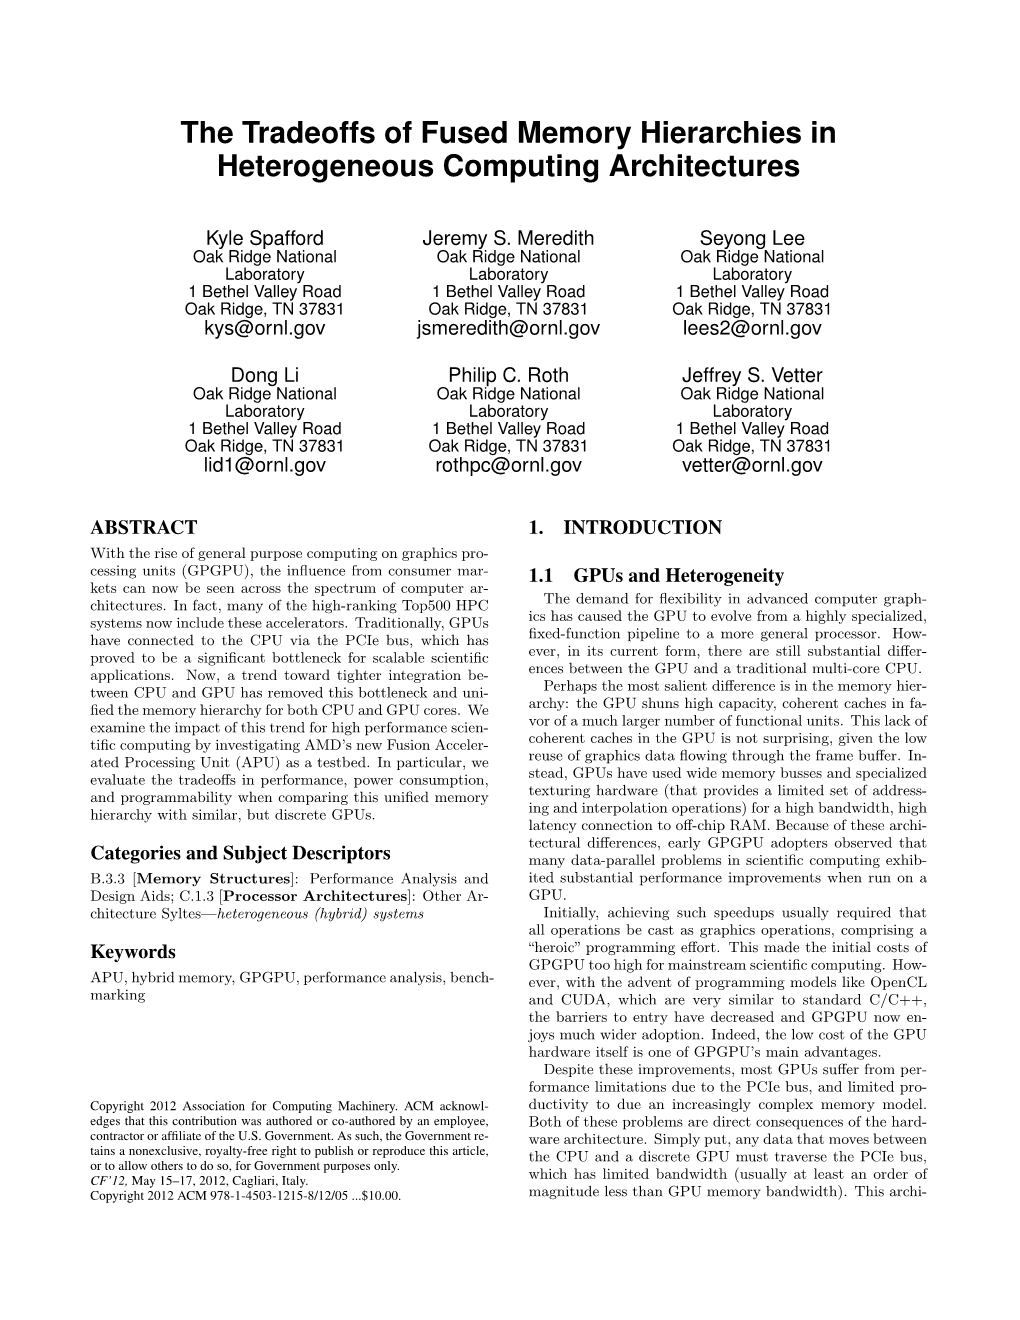 The Tradeoffs of Fused Memory Hierarchies in Heterogeneous Computing Architectures